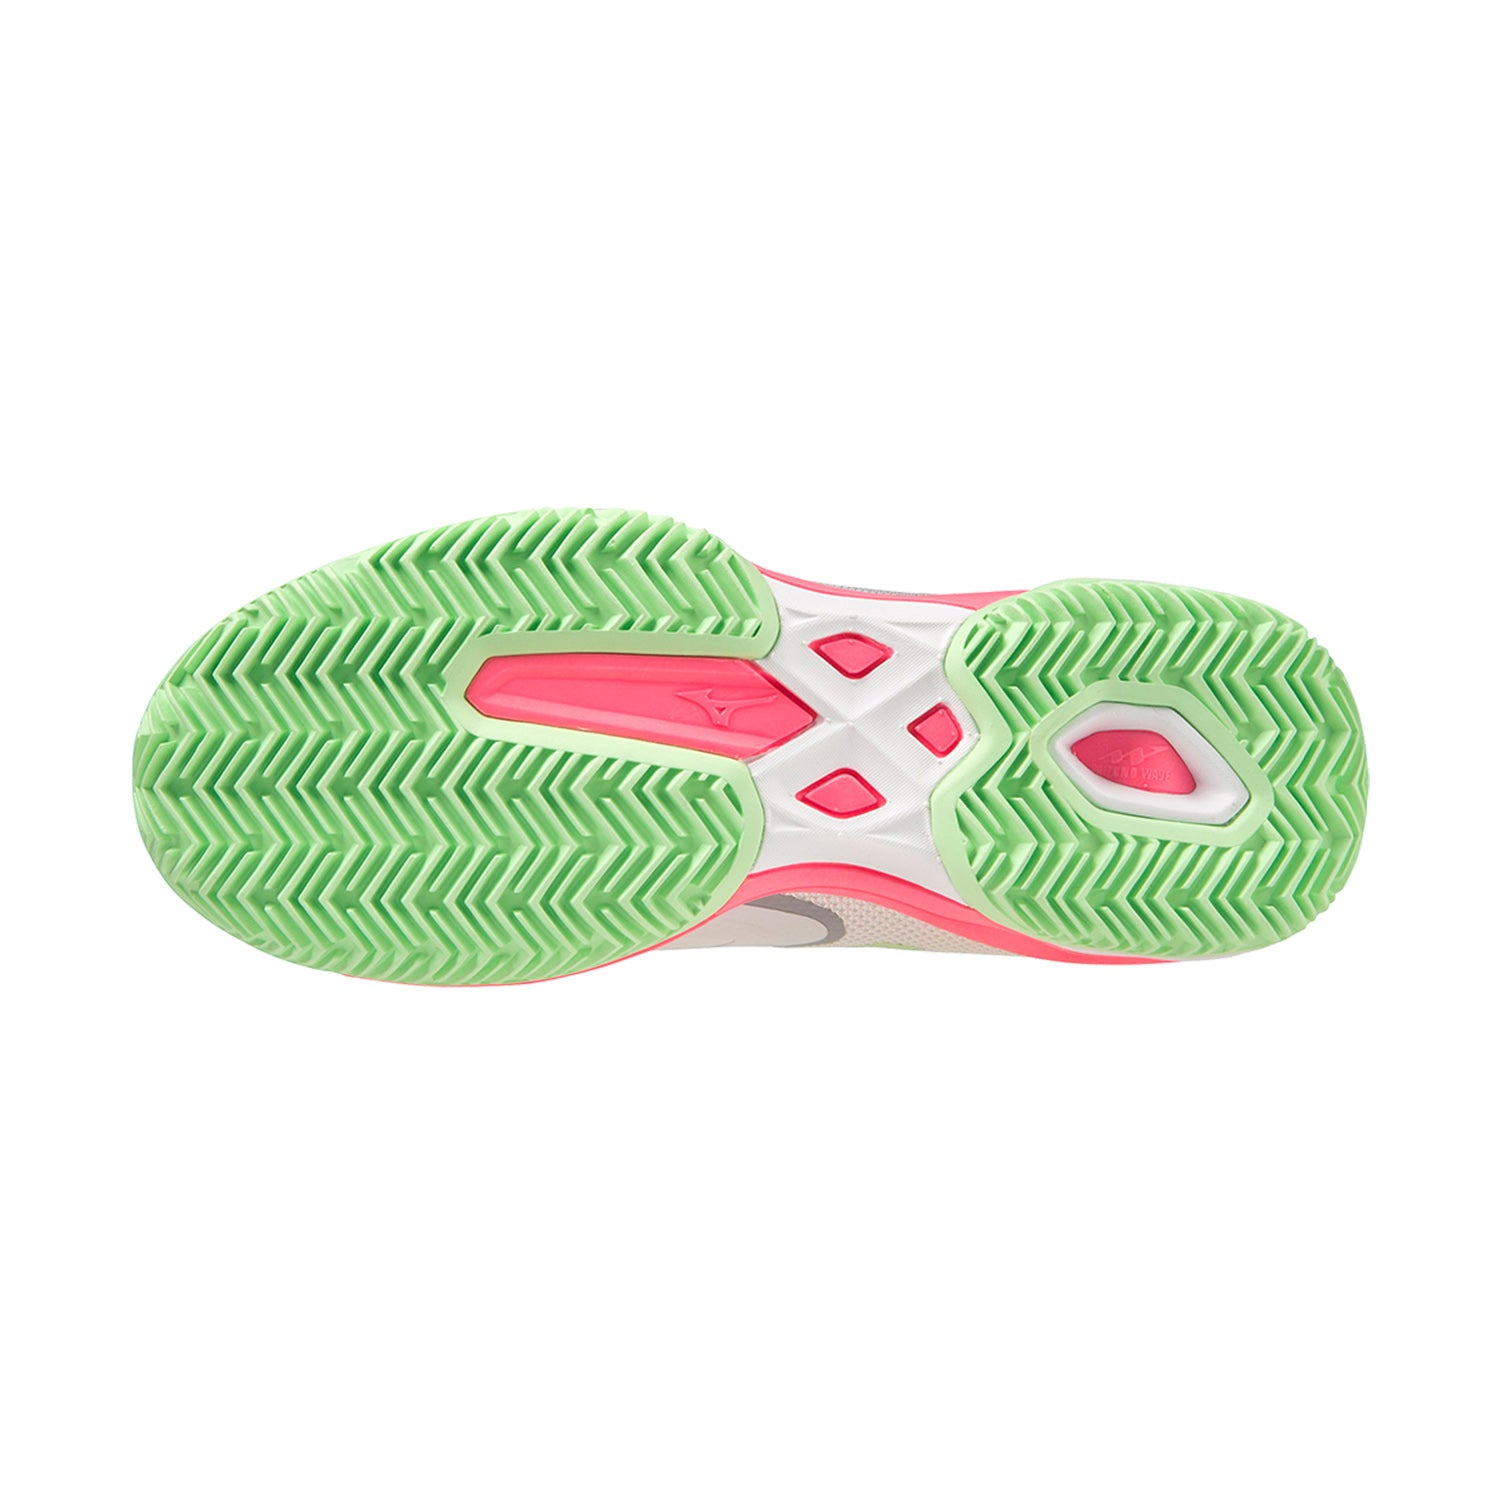 WAVE EXCEED LIGHT 2 PADEL PADEL SHOES